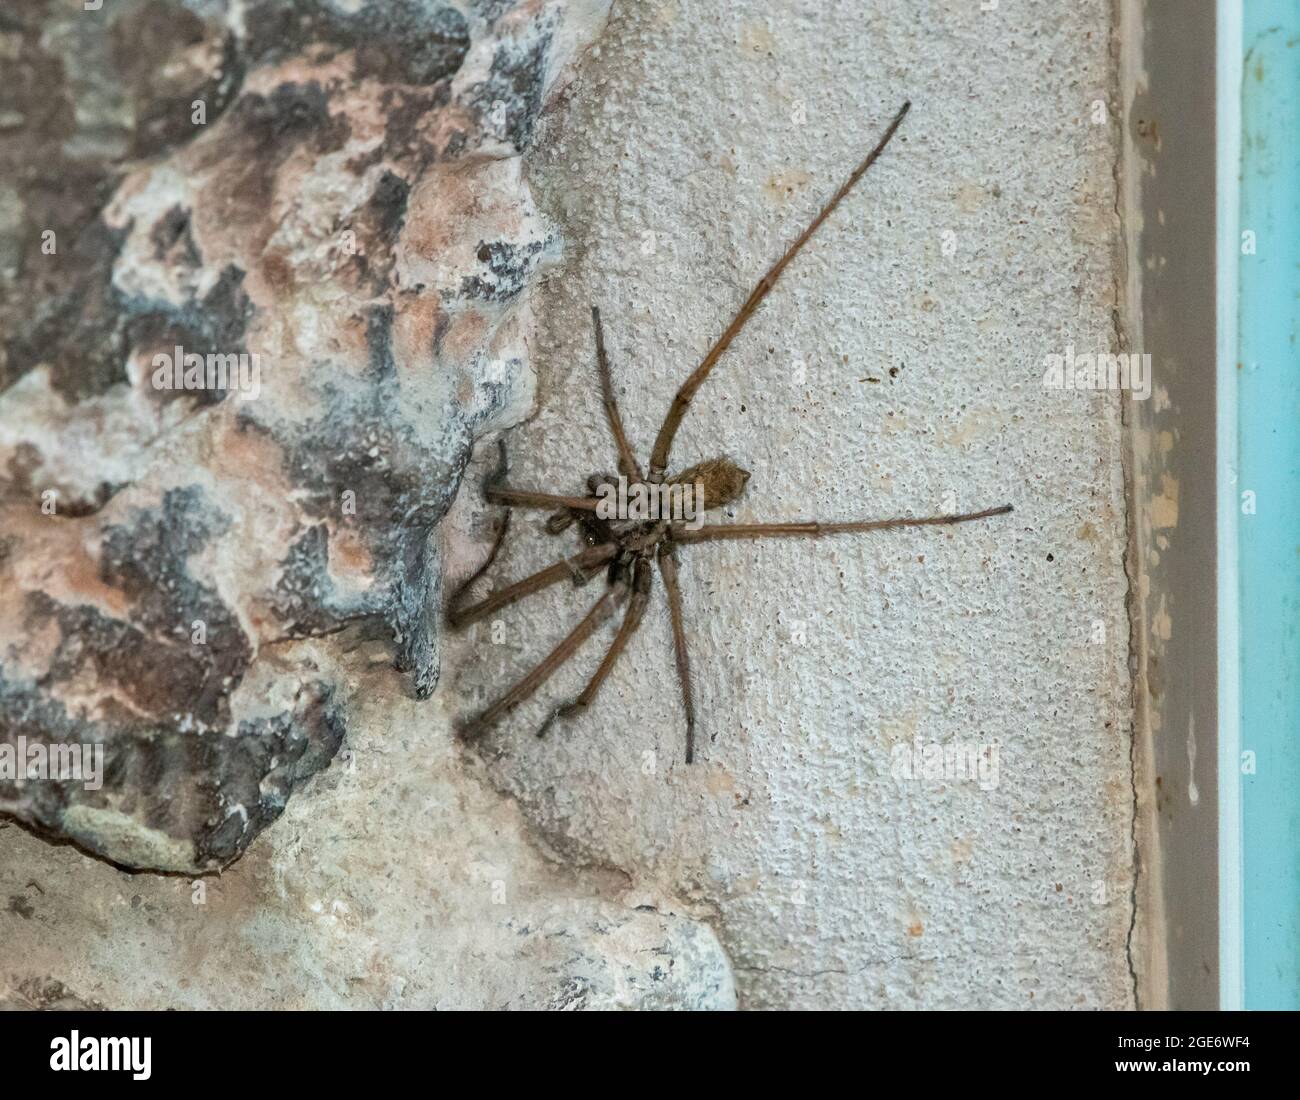 Giant house spider at RSPB's Leighton Moss Nature Reserve, Silverdale, Lancashire, UK Stock Photo